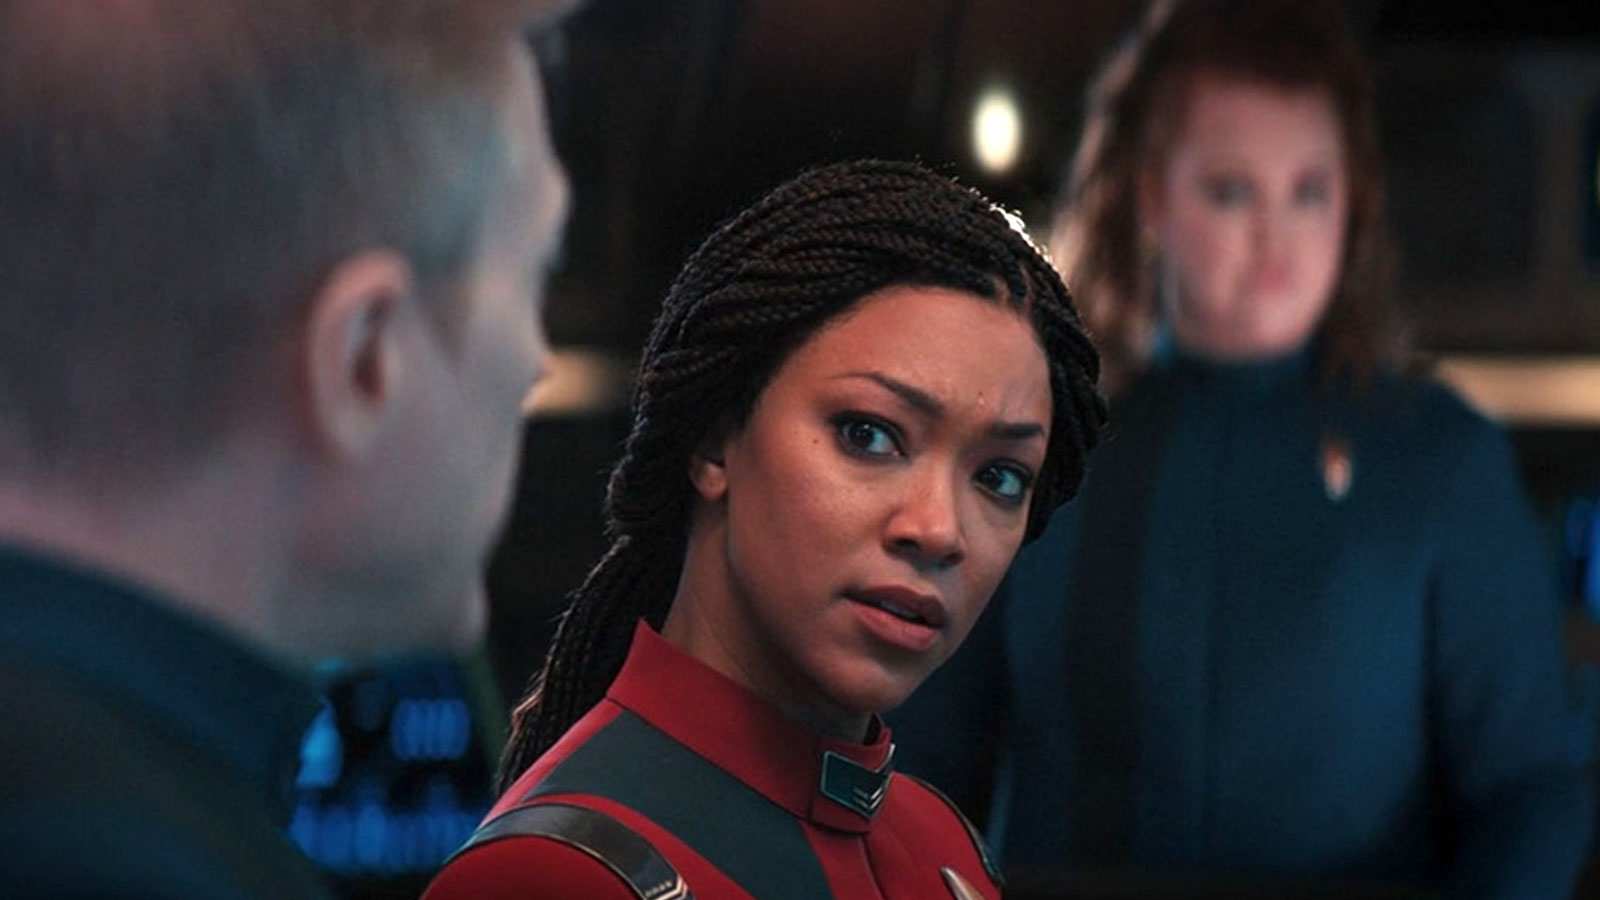 Star Trek: Discovery "Anomaly" Review: What Is Star Trek If Not An Analogy?